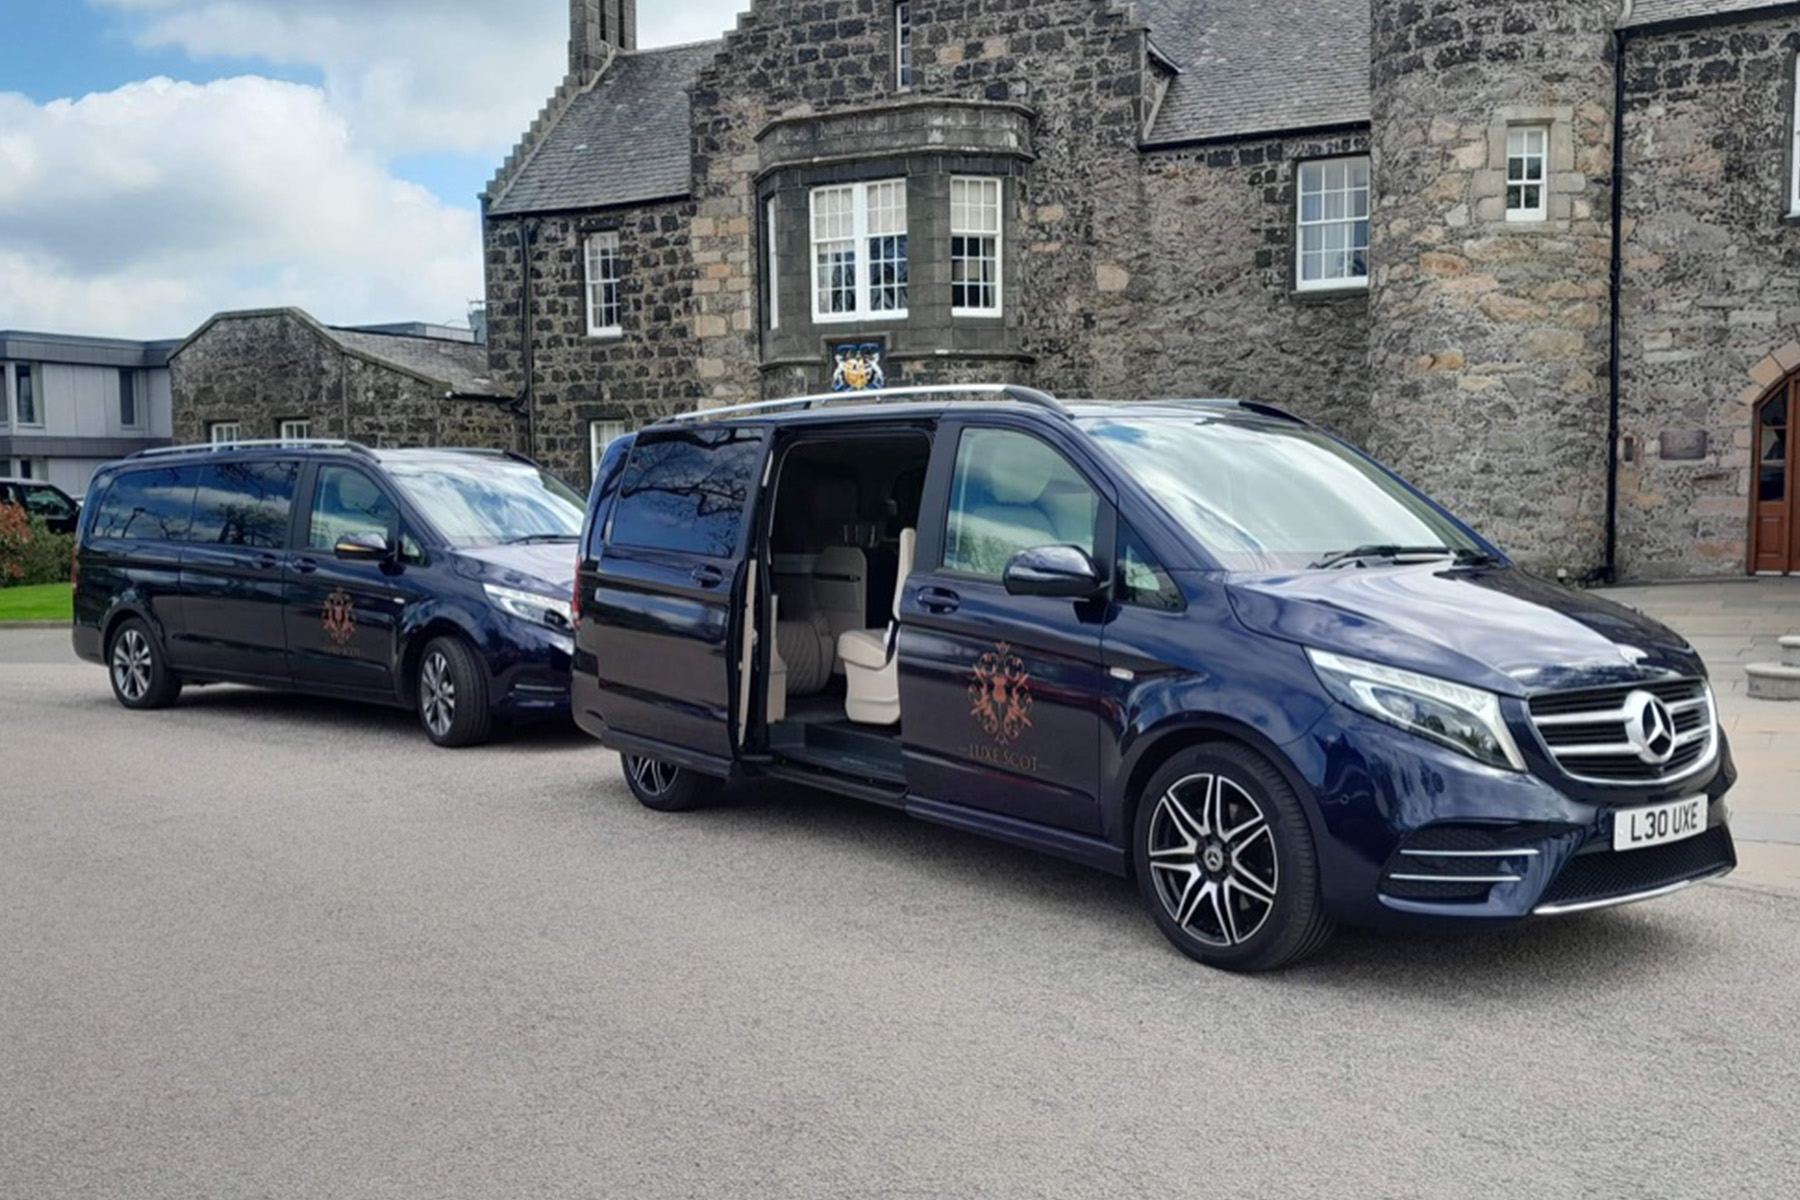 Jet Class Vehicles at Meldrum House - Luxe Scot